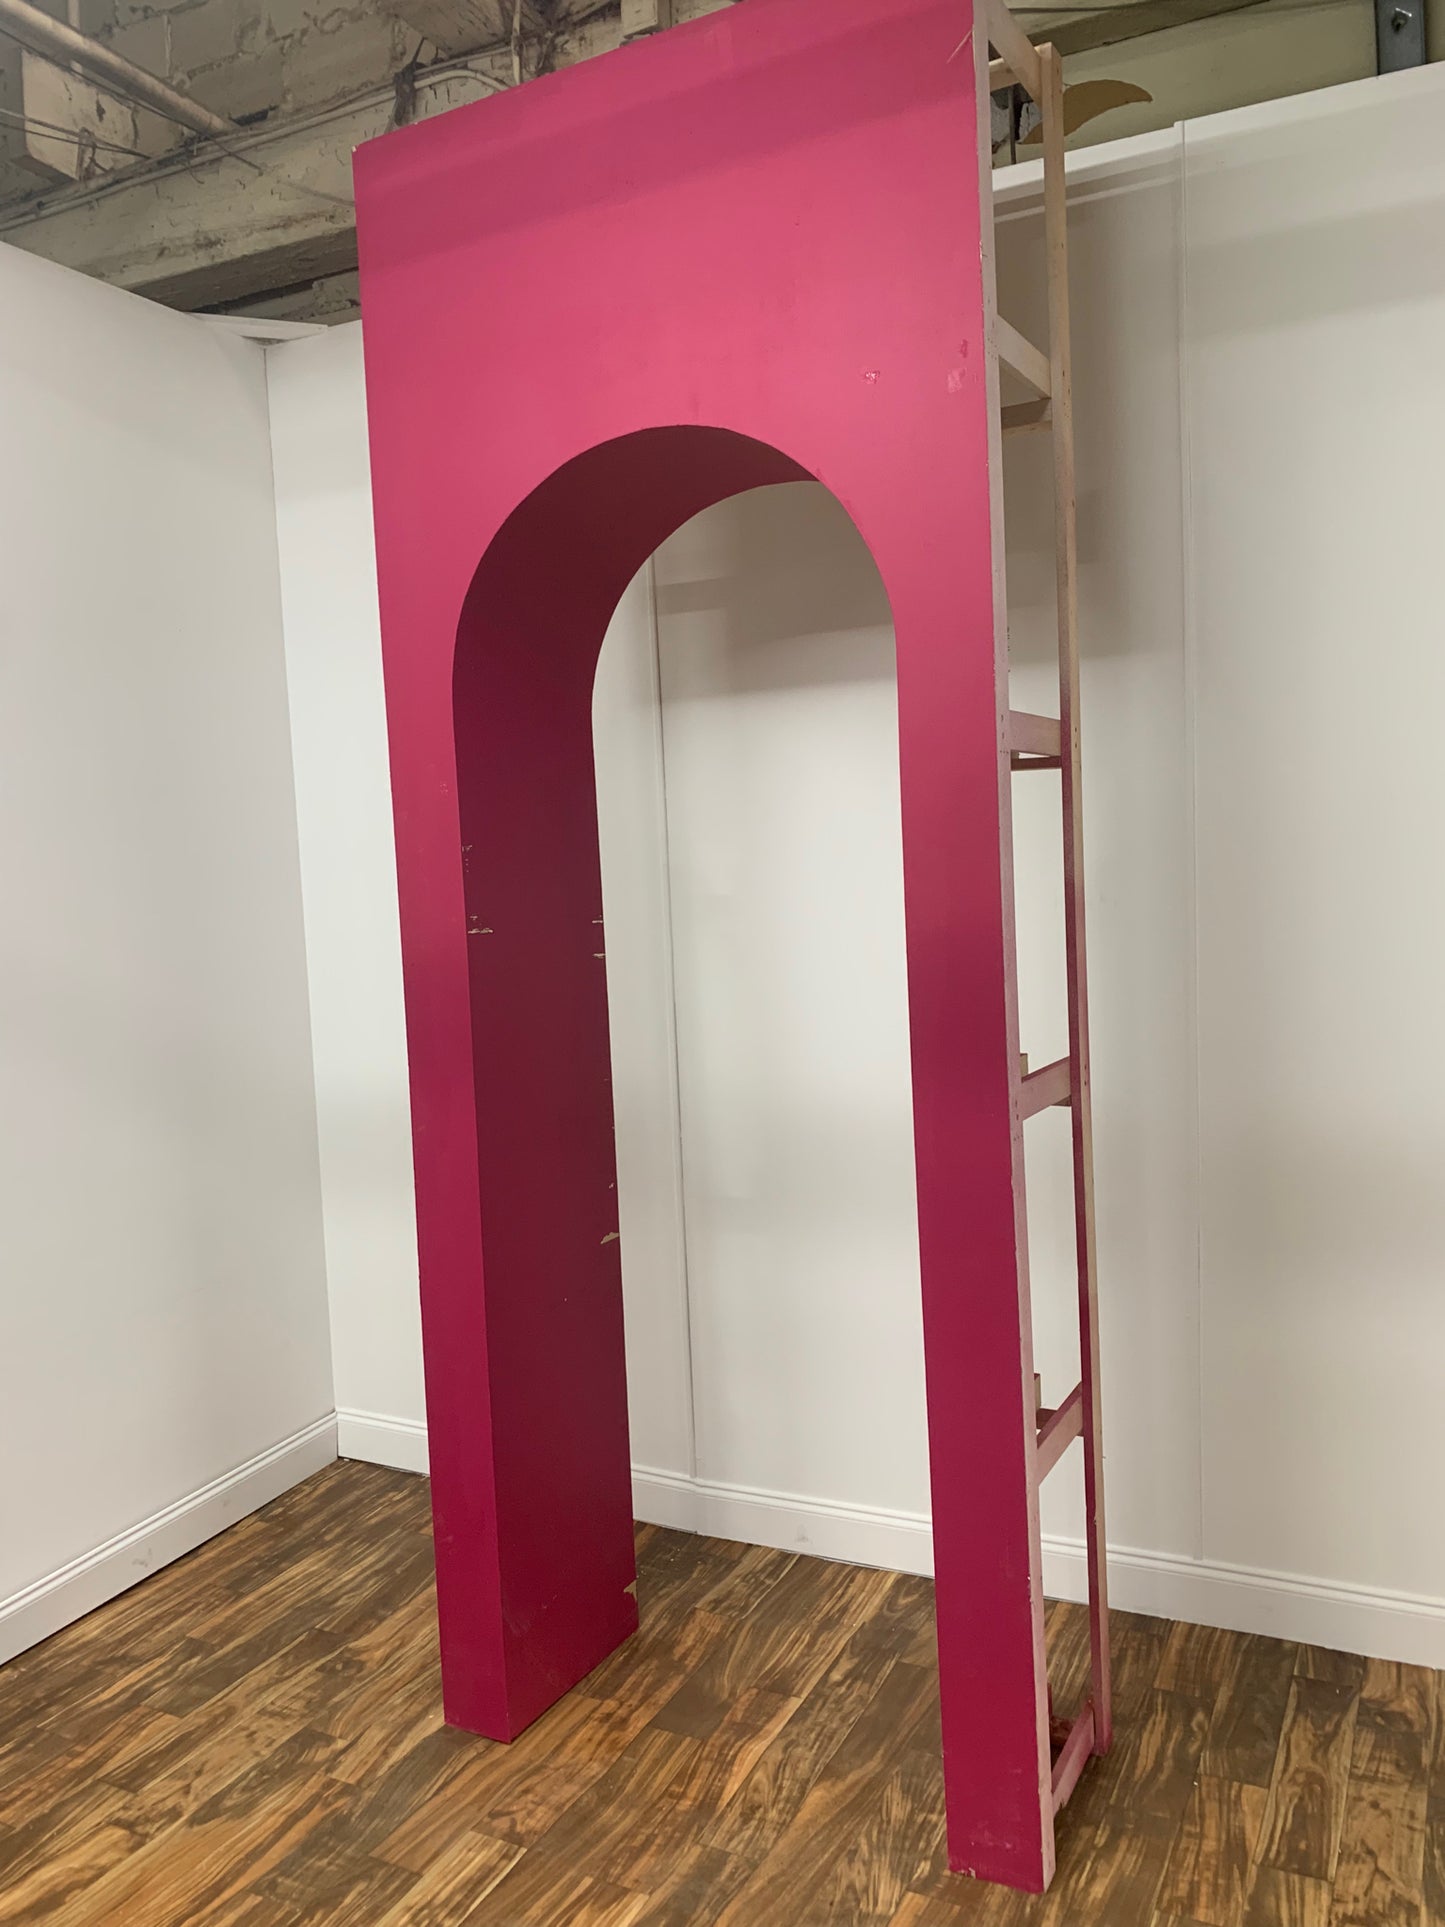 PINK ARCH, EXTRA LARGE